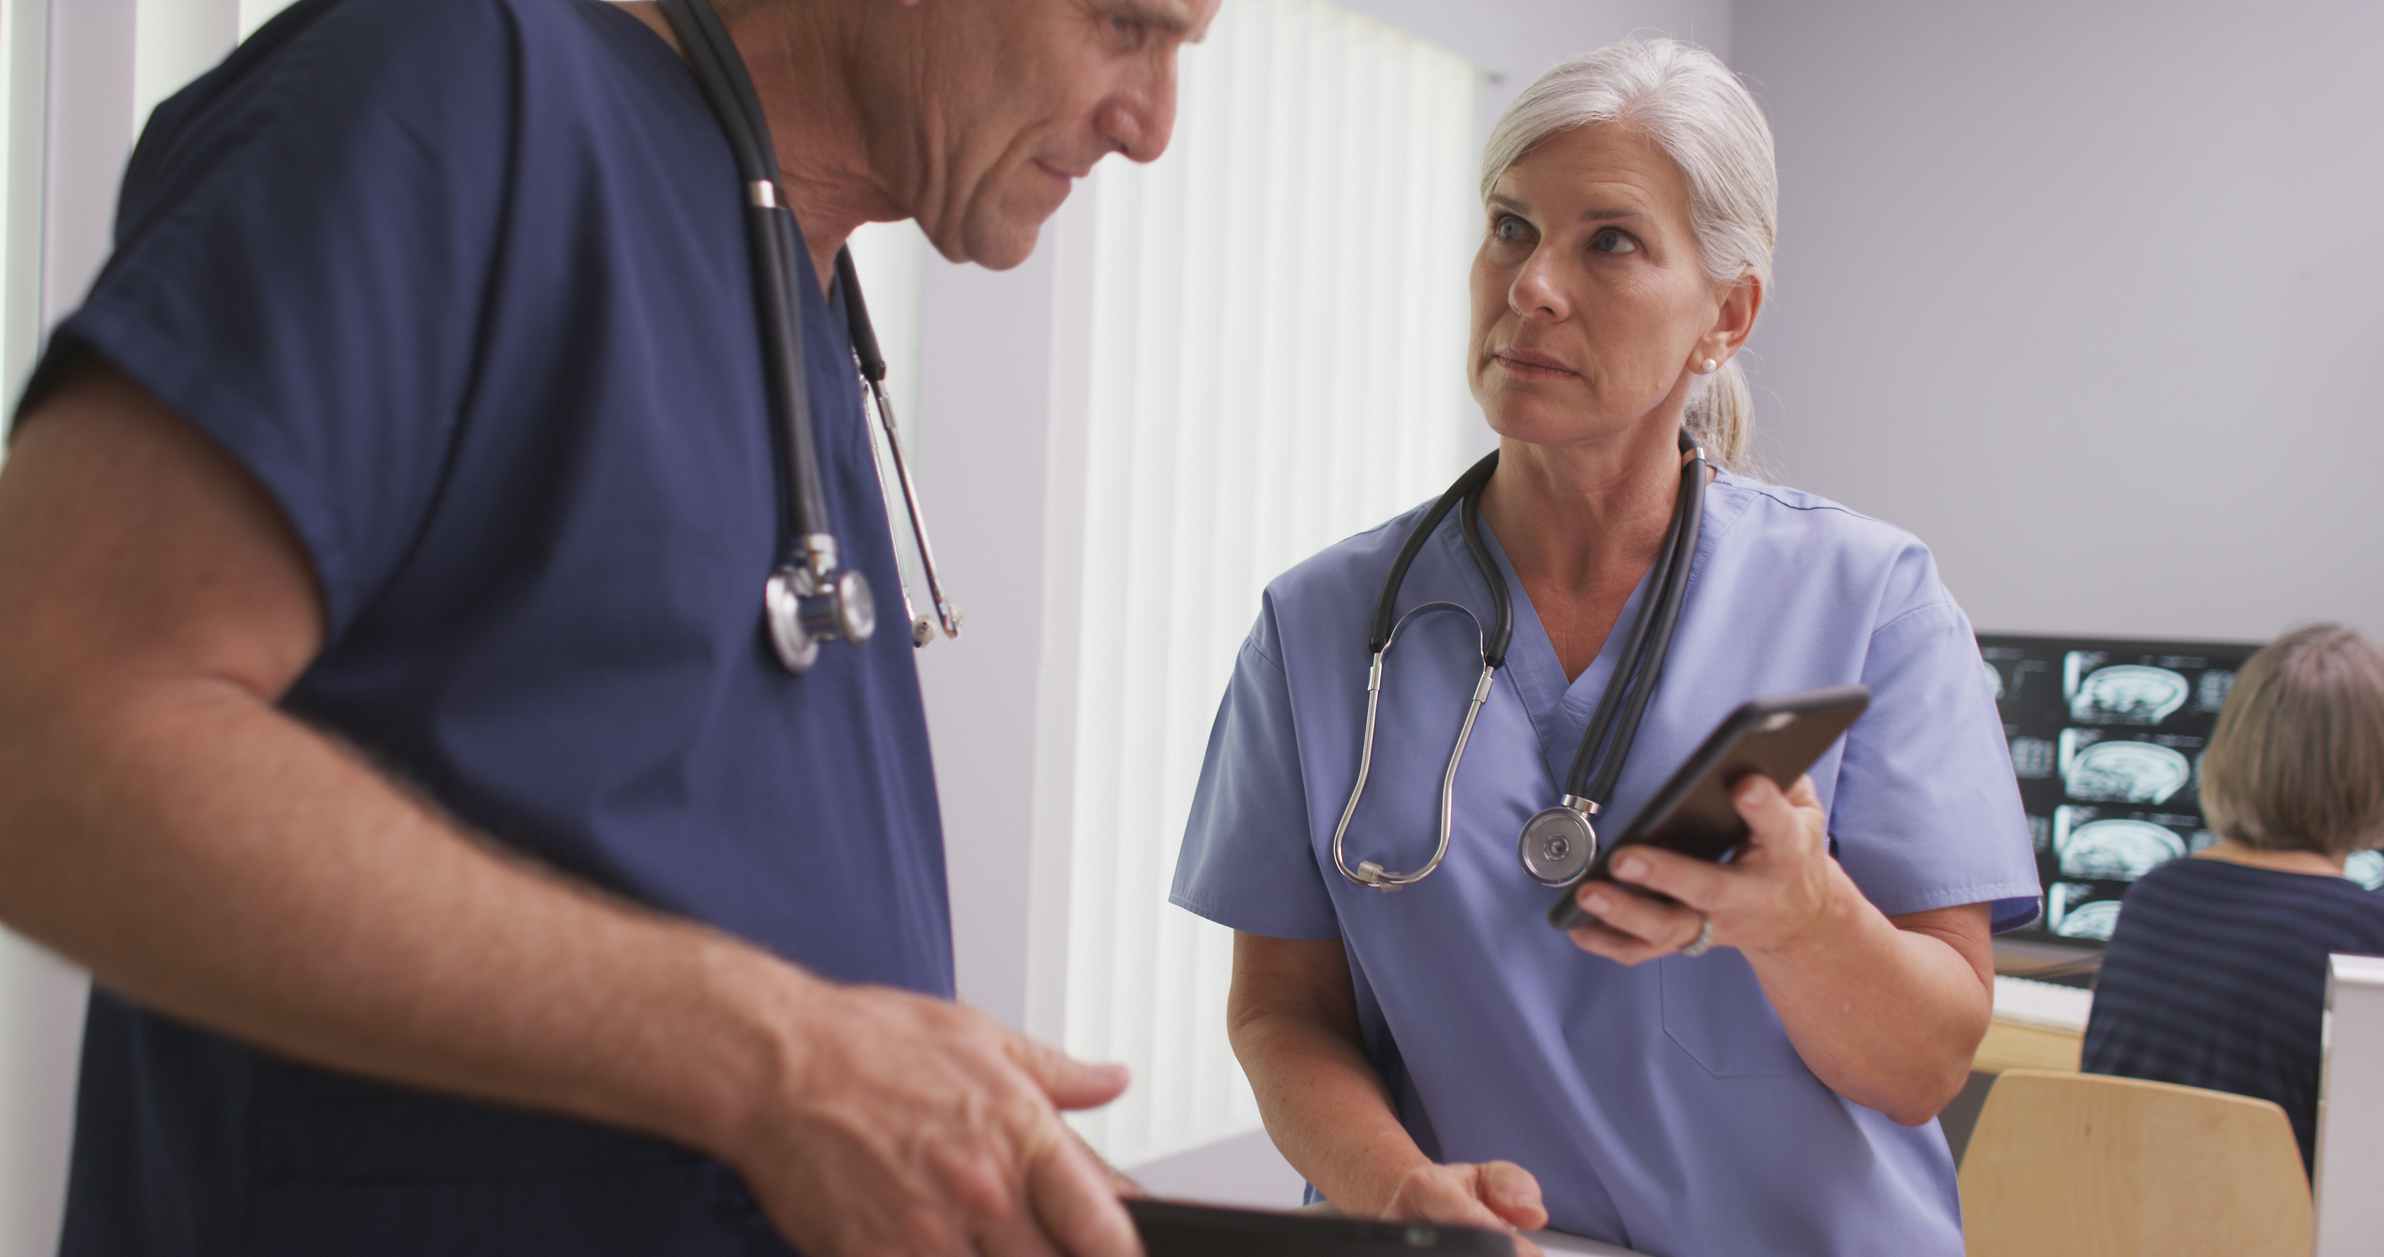 Nurse and doctor look at smartphone